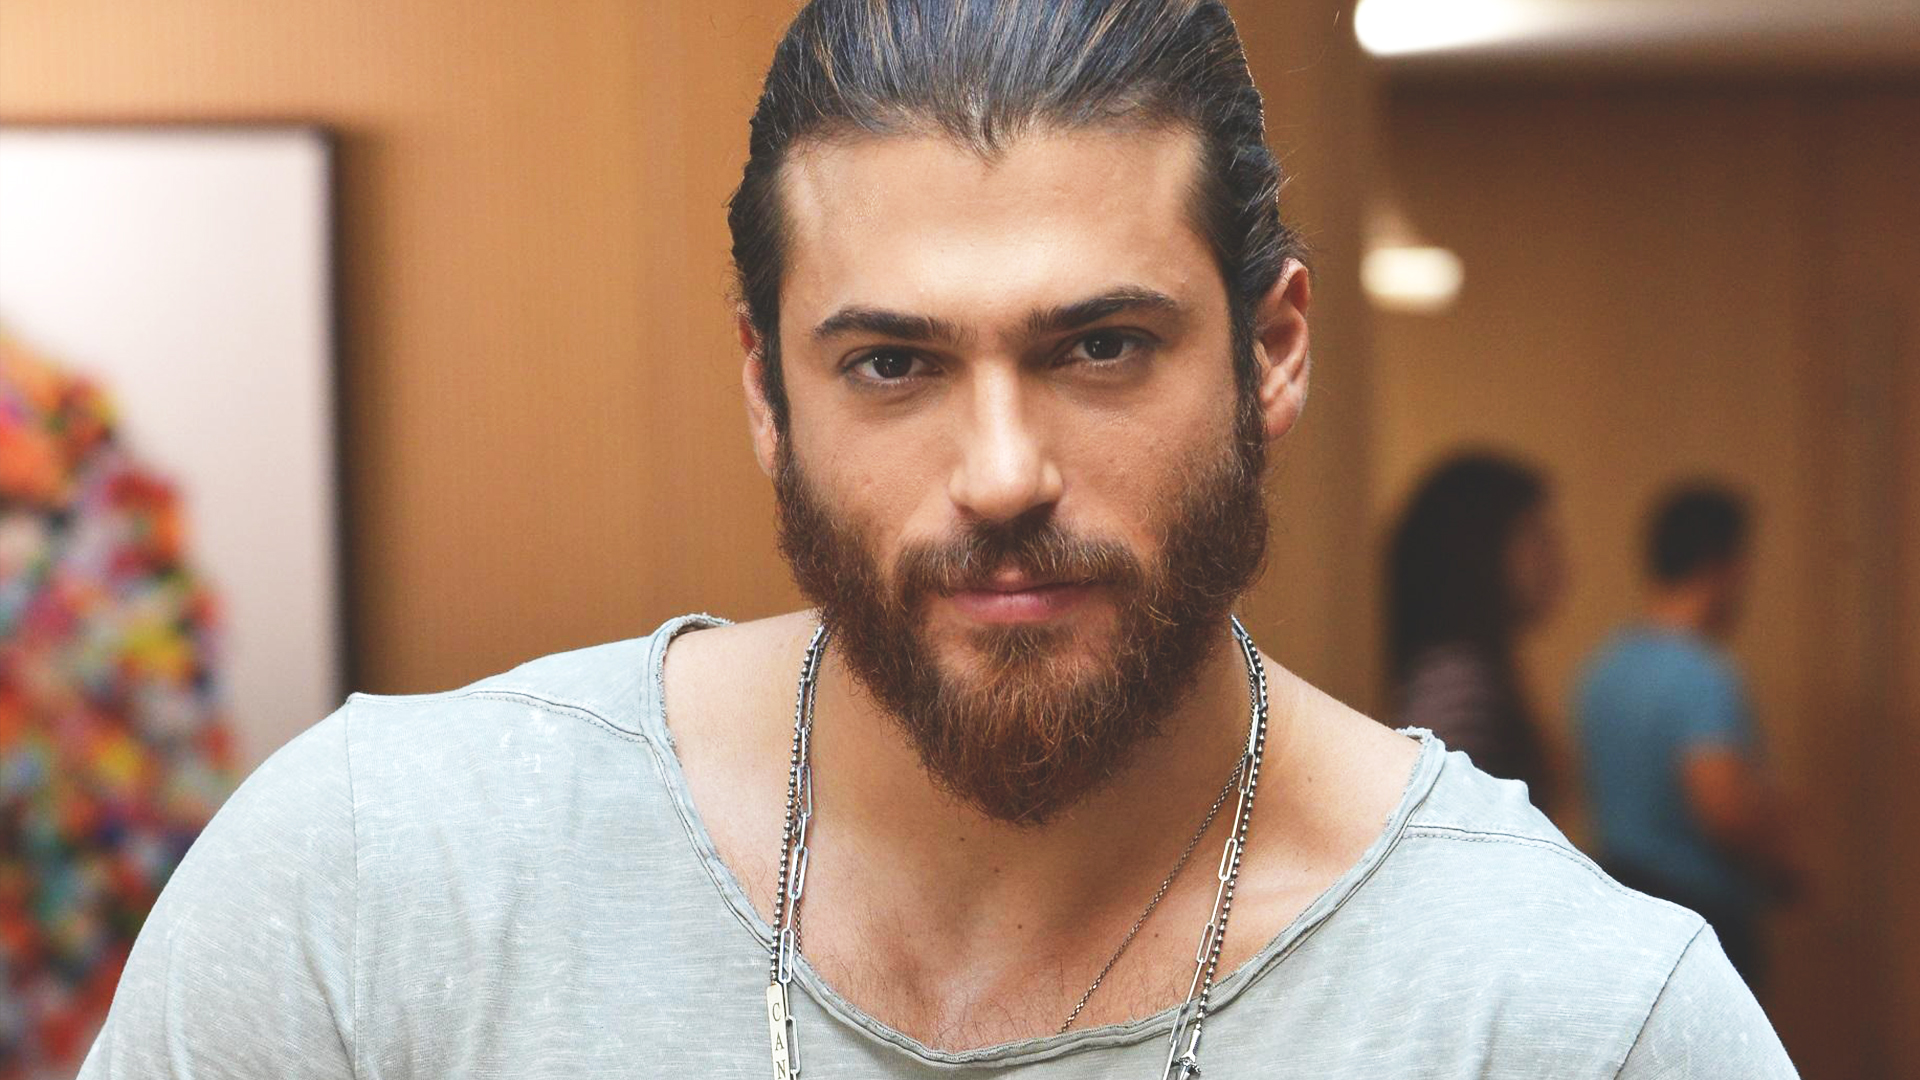 What You Didn't Know About Can Yaman Until Now